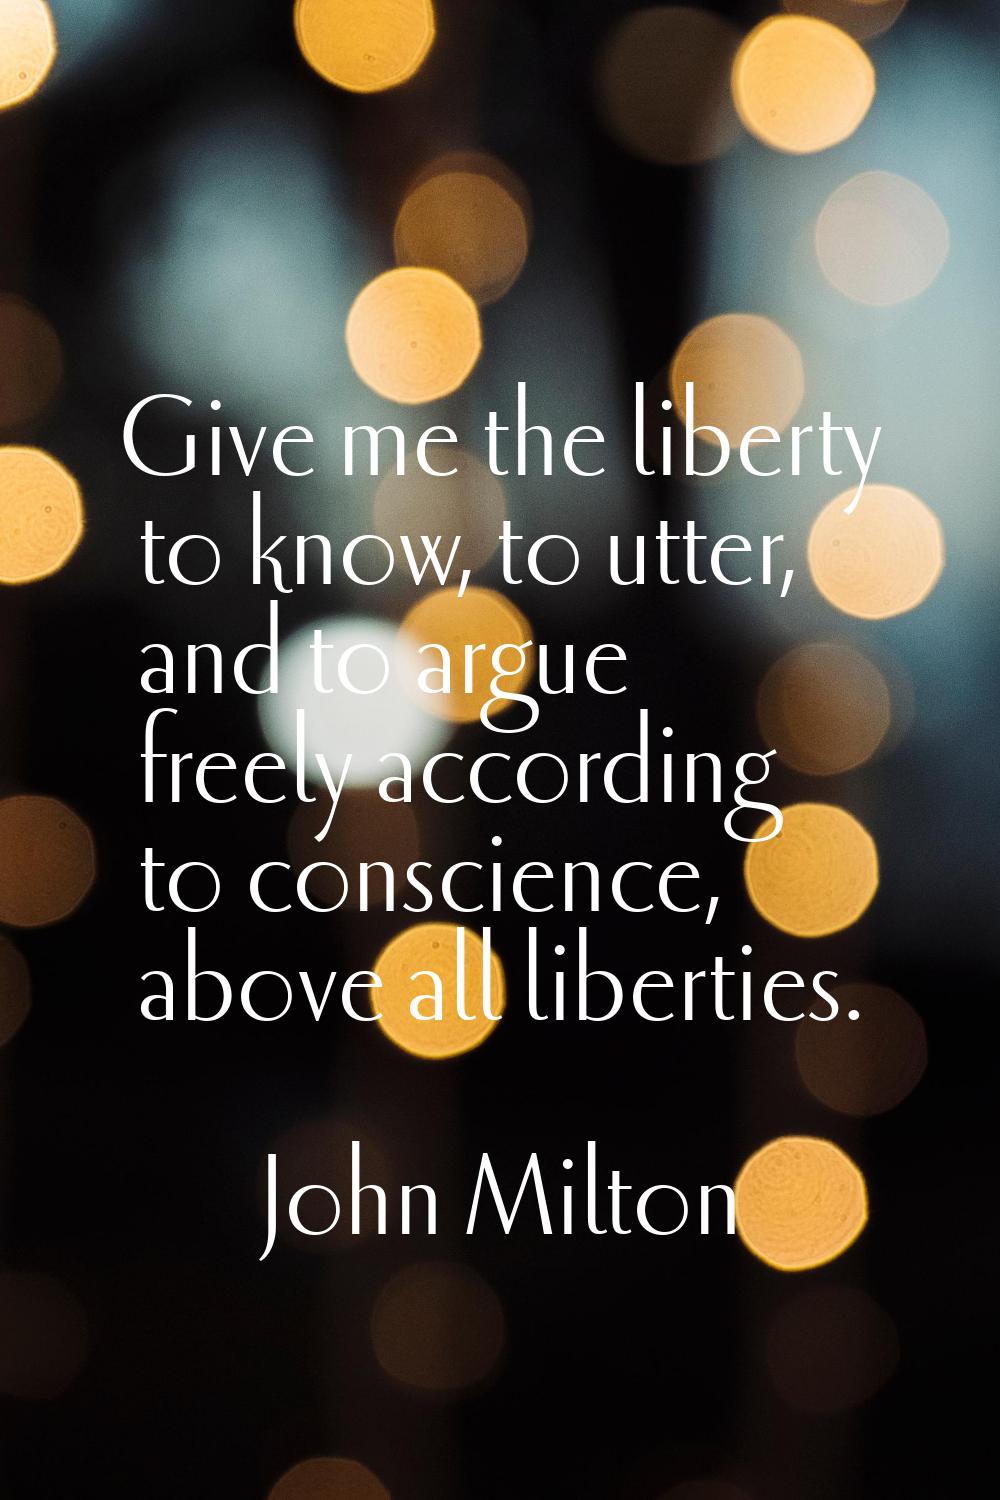 Give me the liberty to know, to utter, and to argue freely according to conscience, above all liber